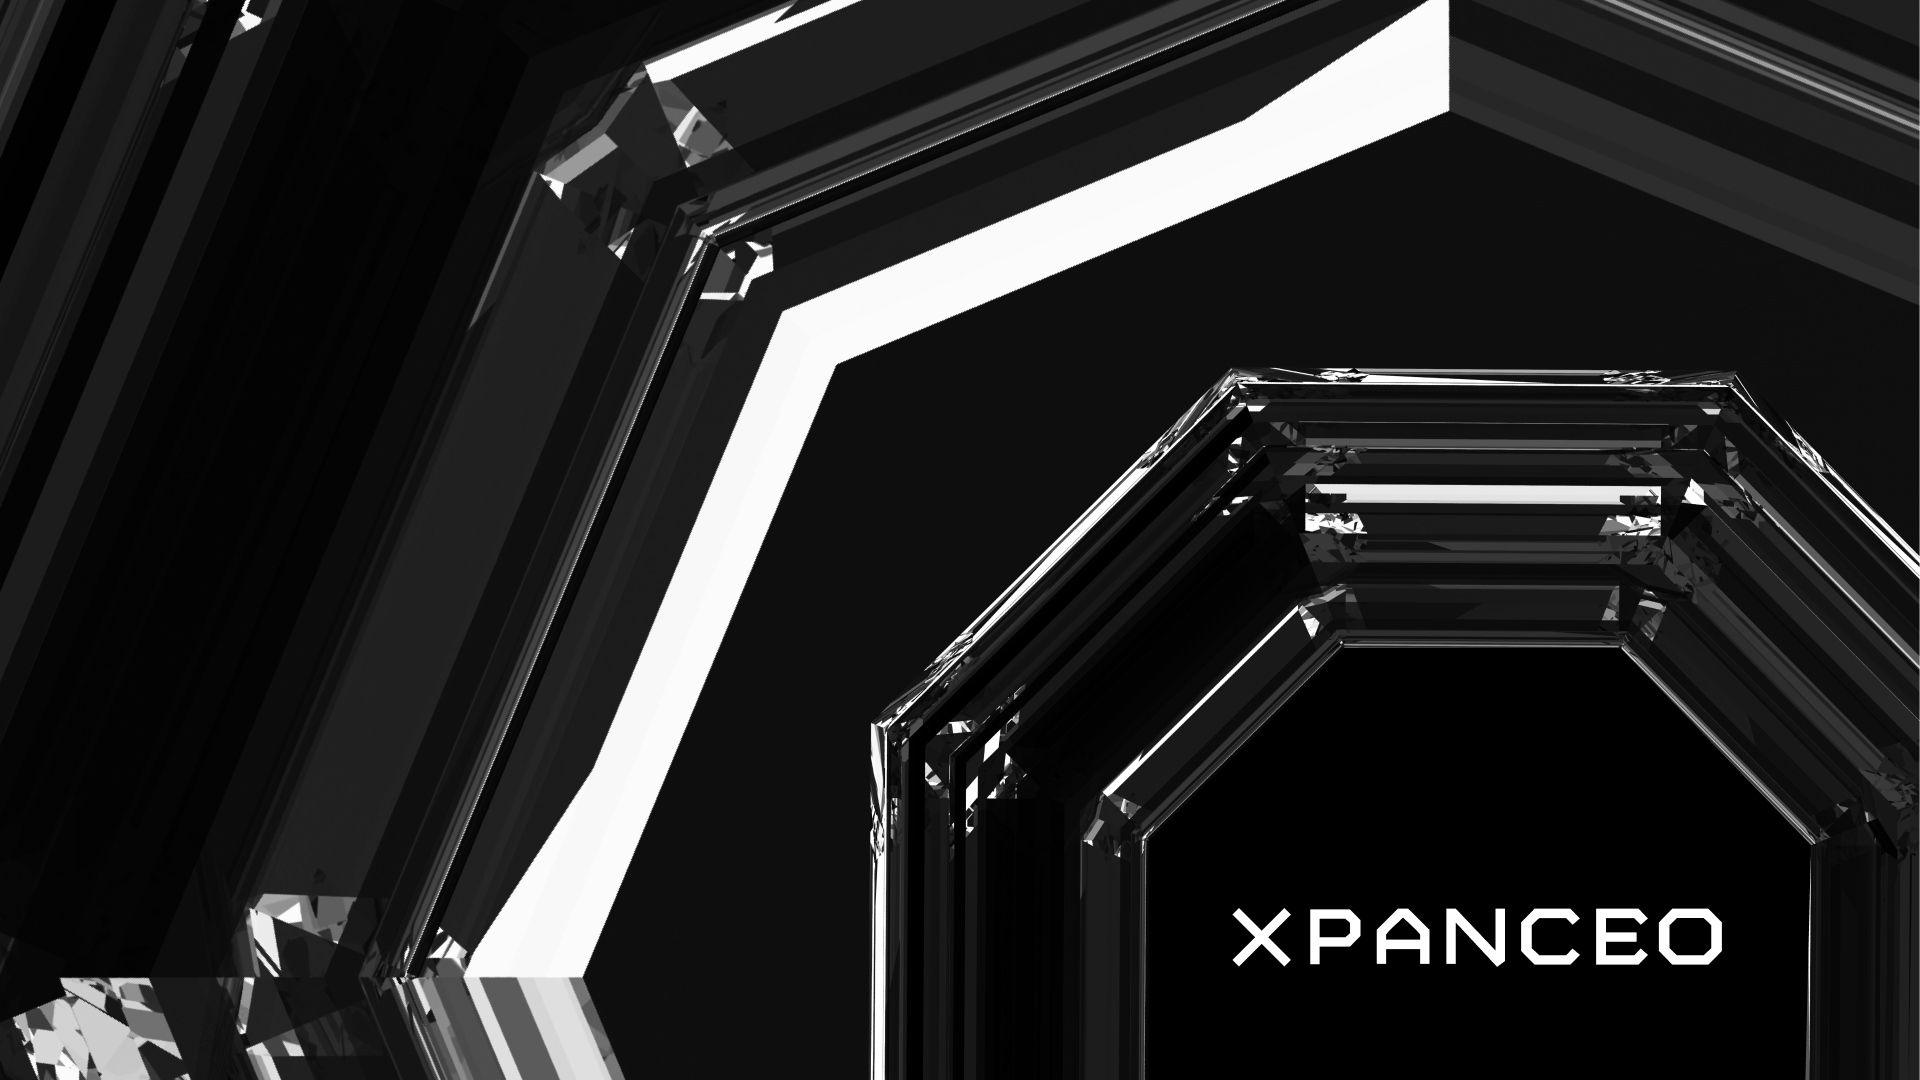 Embacy Created a Brand Identity and Website for Xpanceo